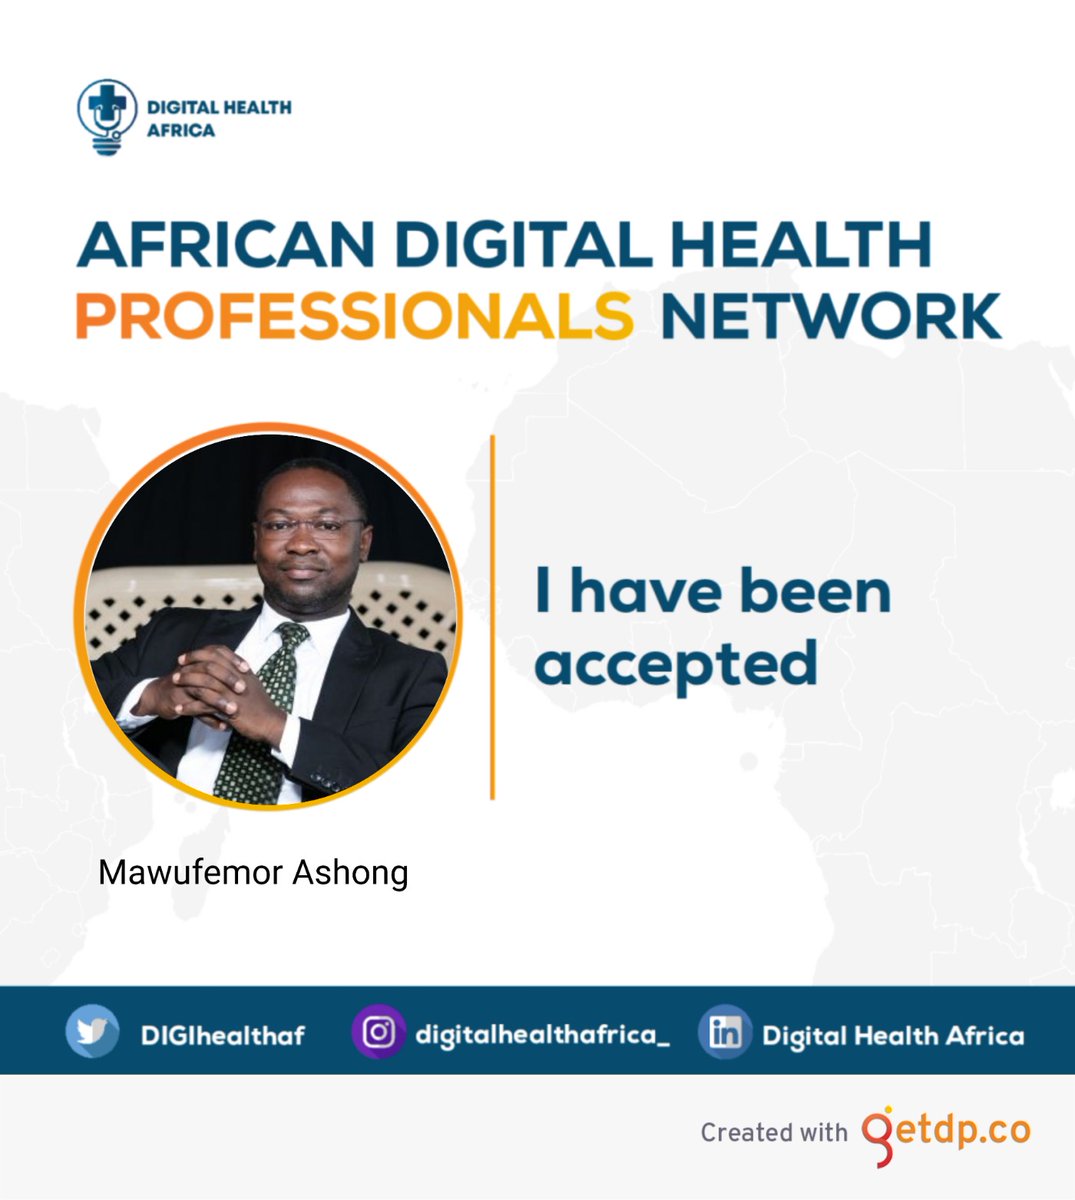 I have been accepted into the African Digital Health Professionals Network @DIGIhealthAf

#digitalHealth #digitalHealthAfrica #publicHealth #healthInformatics